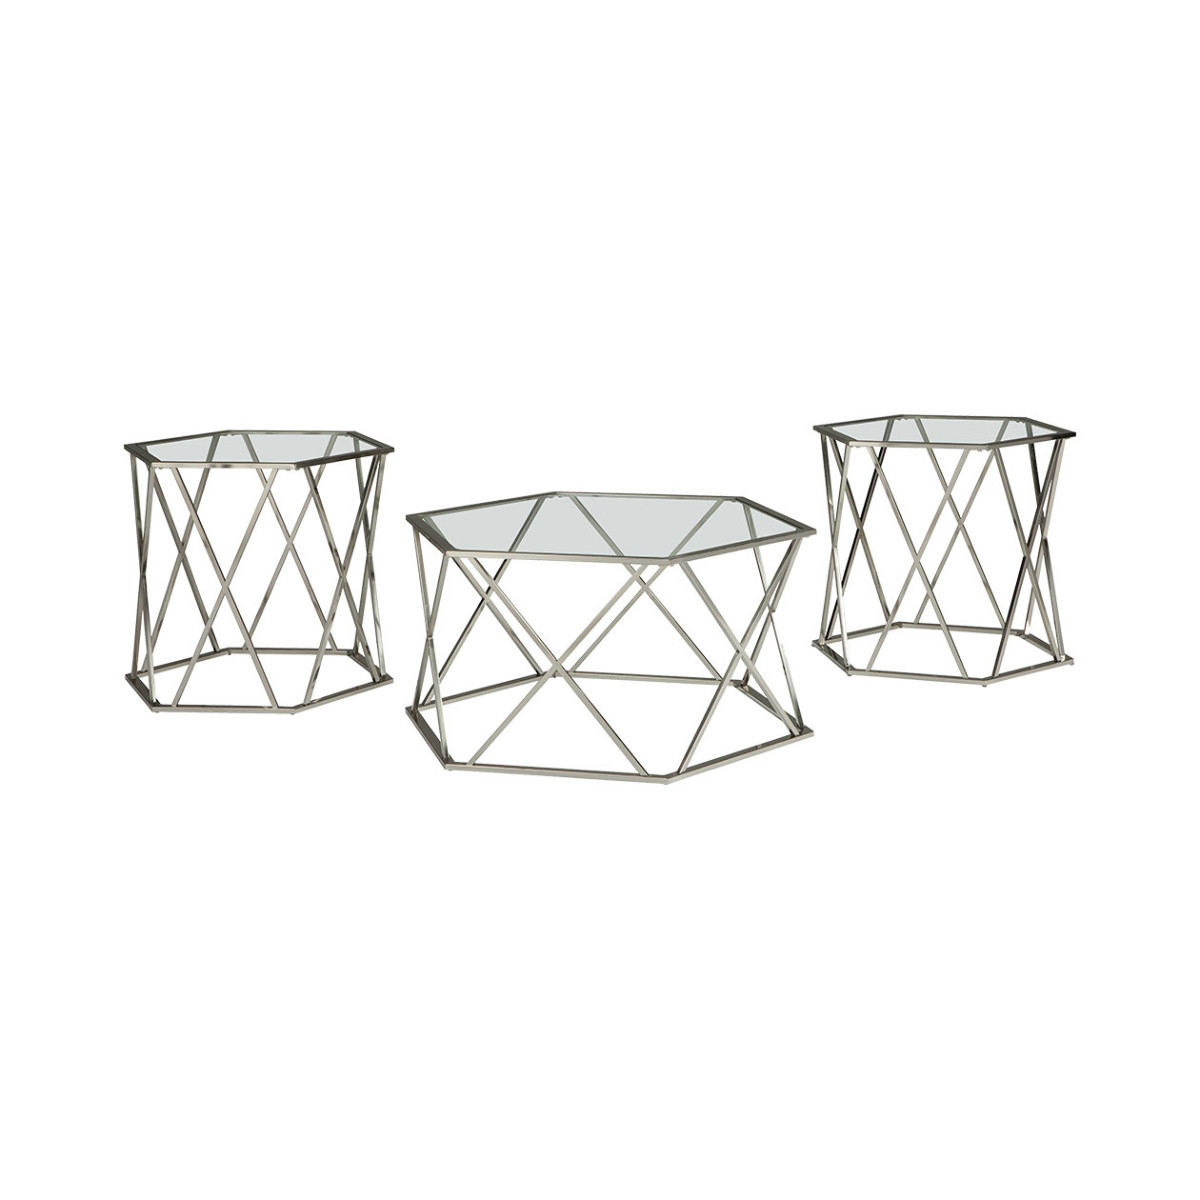 Hexagonal Design Metal Framed Table Set With Inserted Glass Top, Set Of Three, Silver And Clear- Saltoro Sherpi